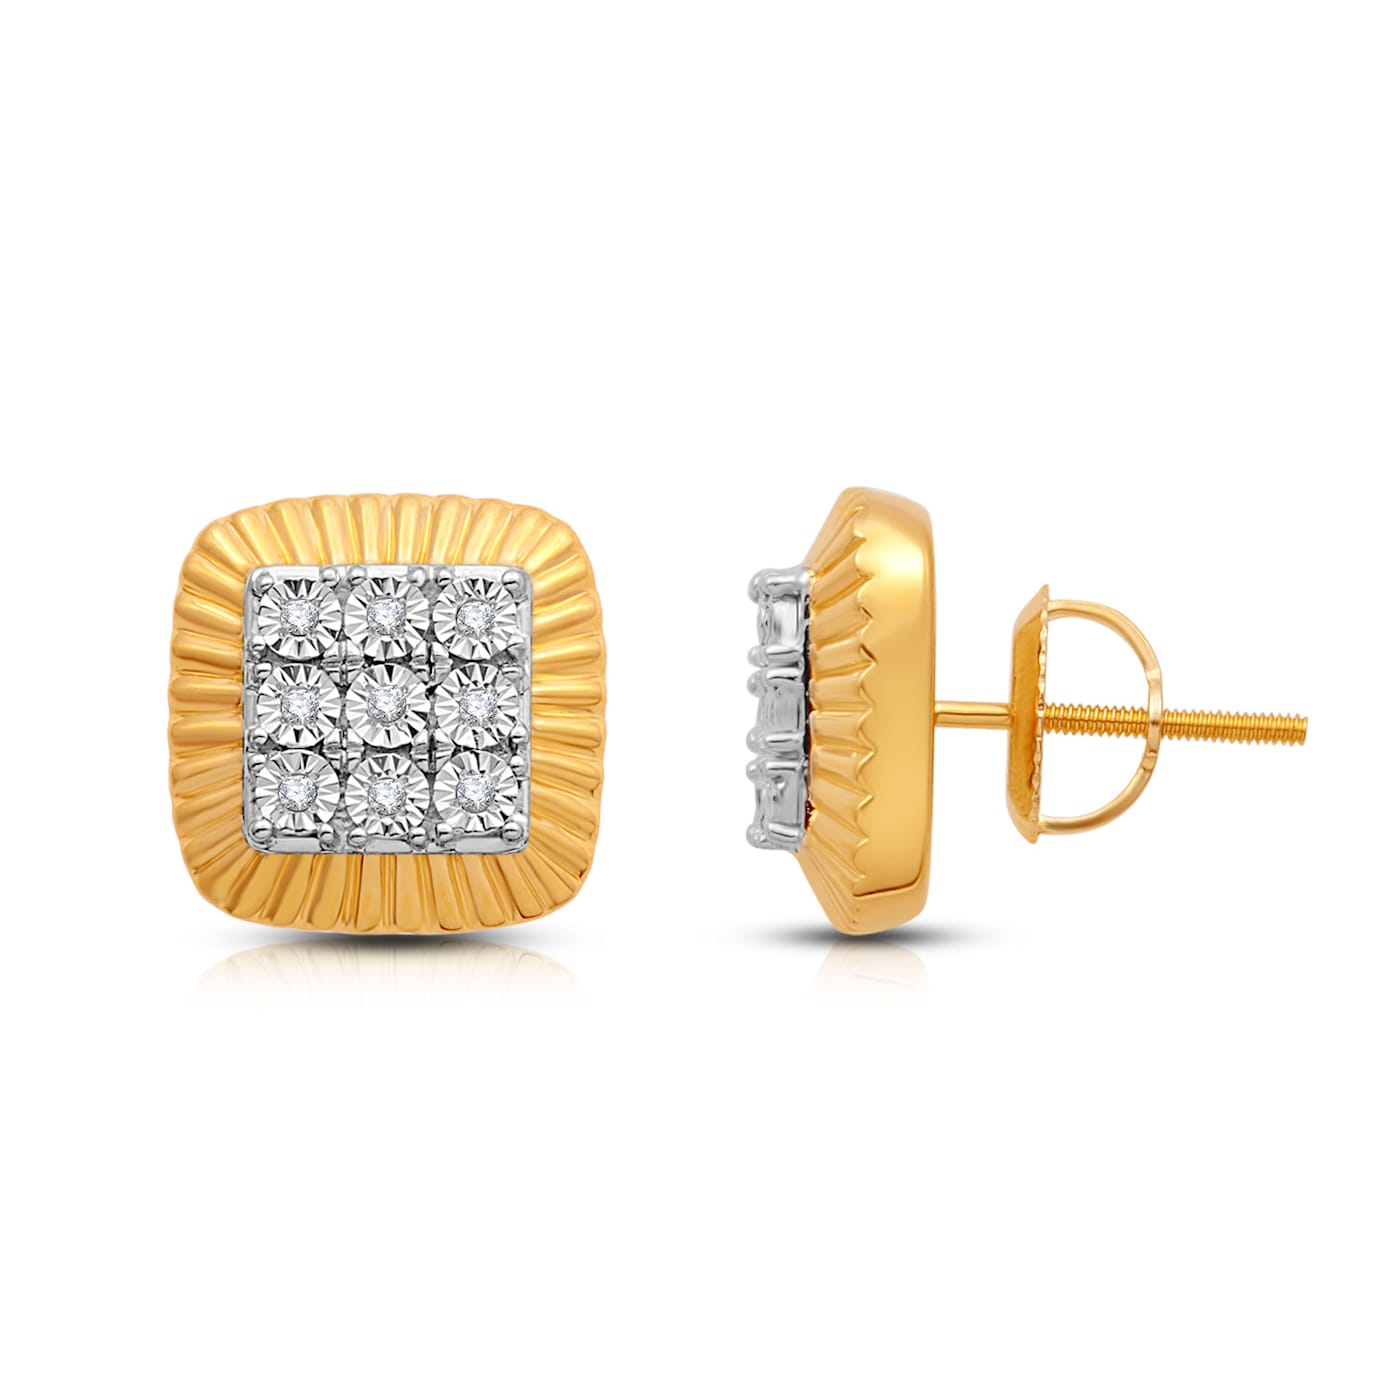 Squared Cubic Zirconia Ear Studs For Men - PAIR – Code Earrings For Man